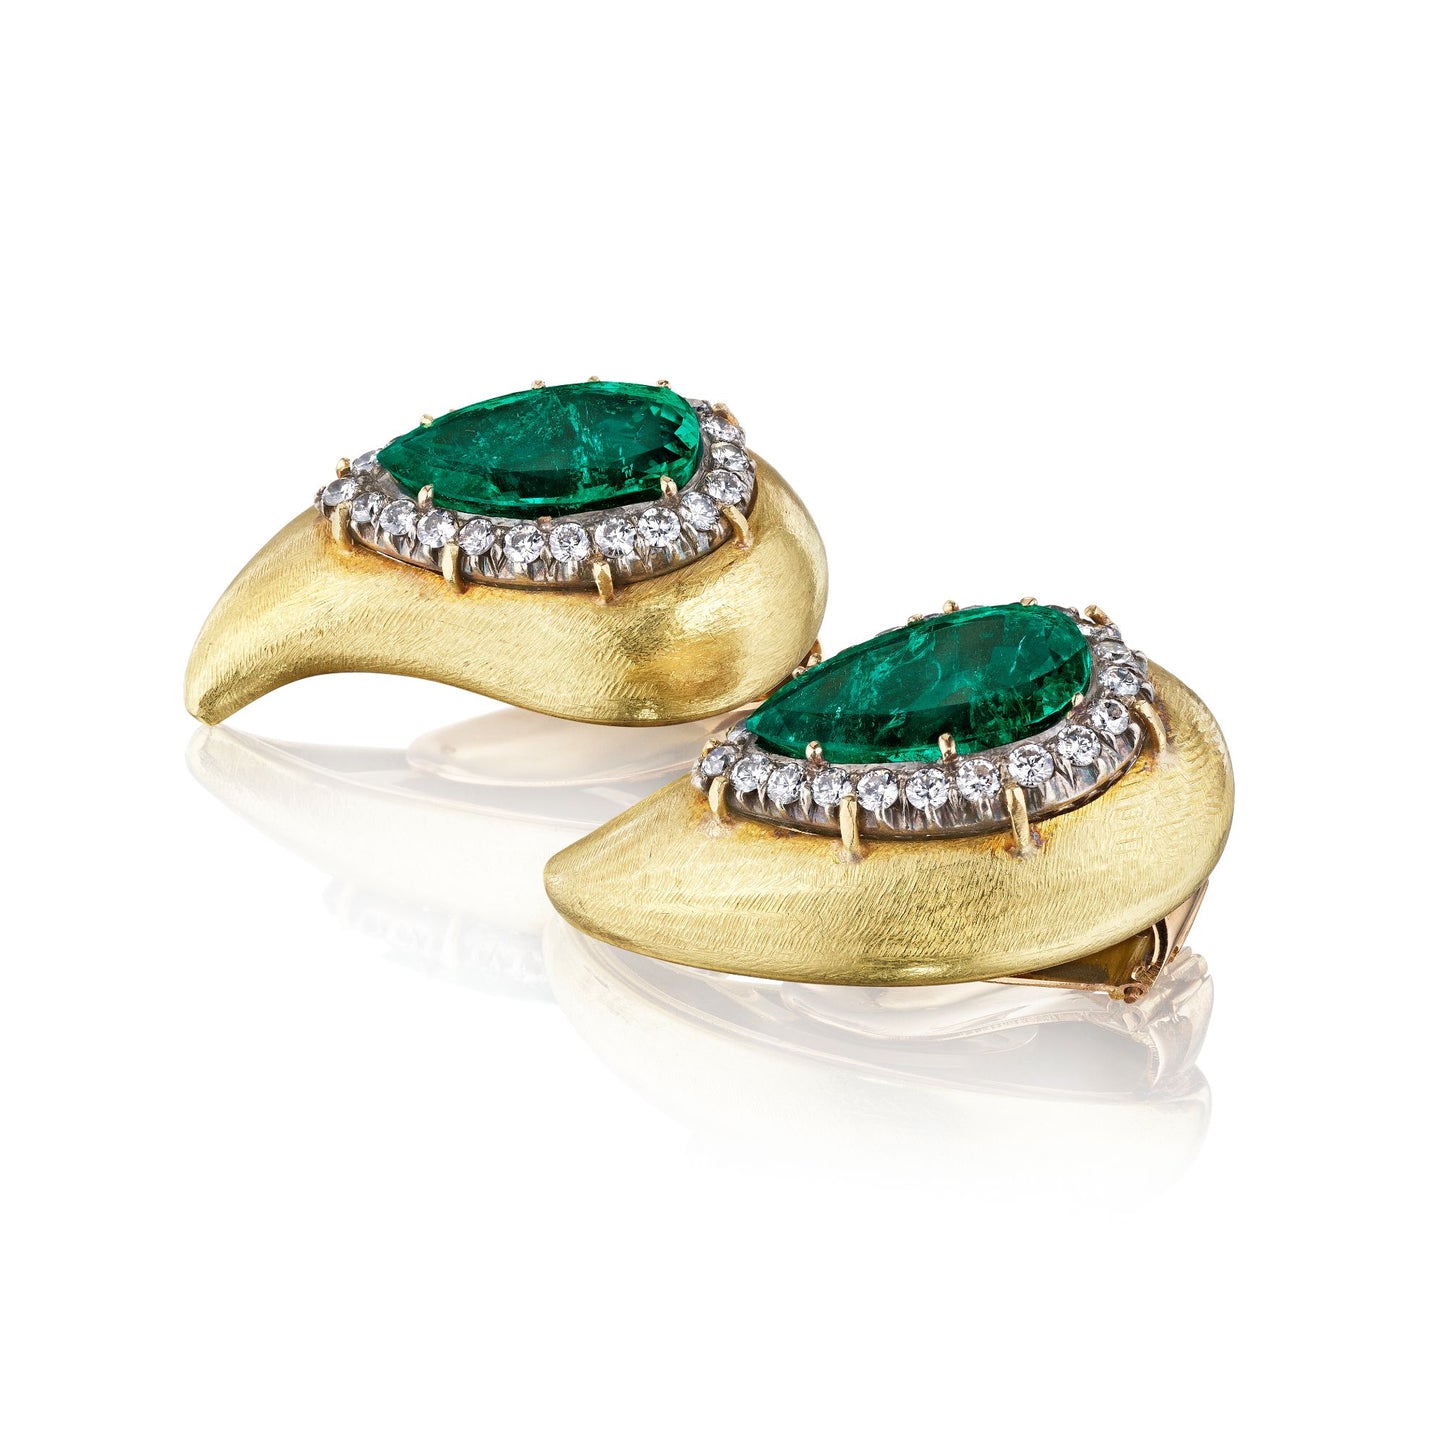 PAIR OF EMERALD AND DIAMOND EAR CLIPS BY SUZANNE BELPERRON, PARIS, CIRCA 1970